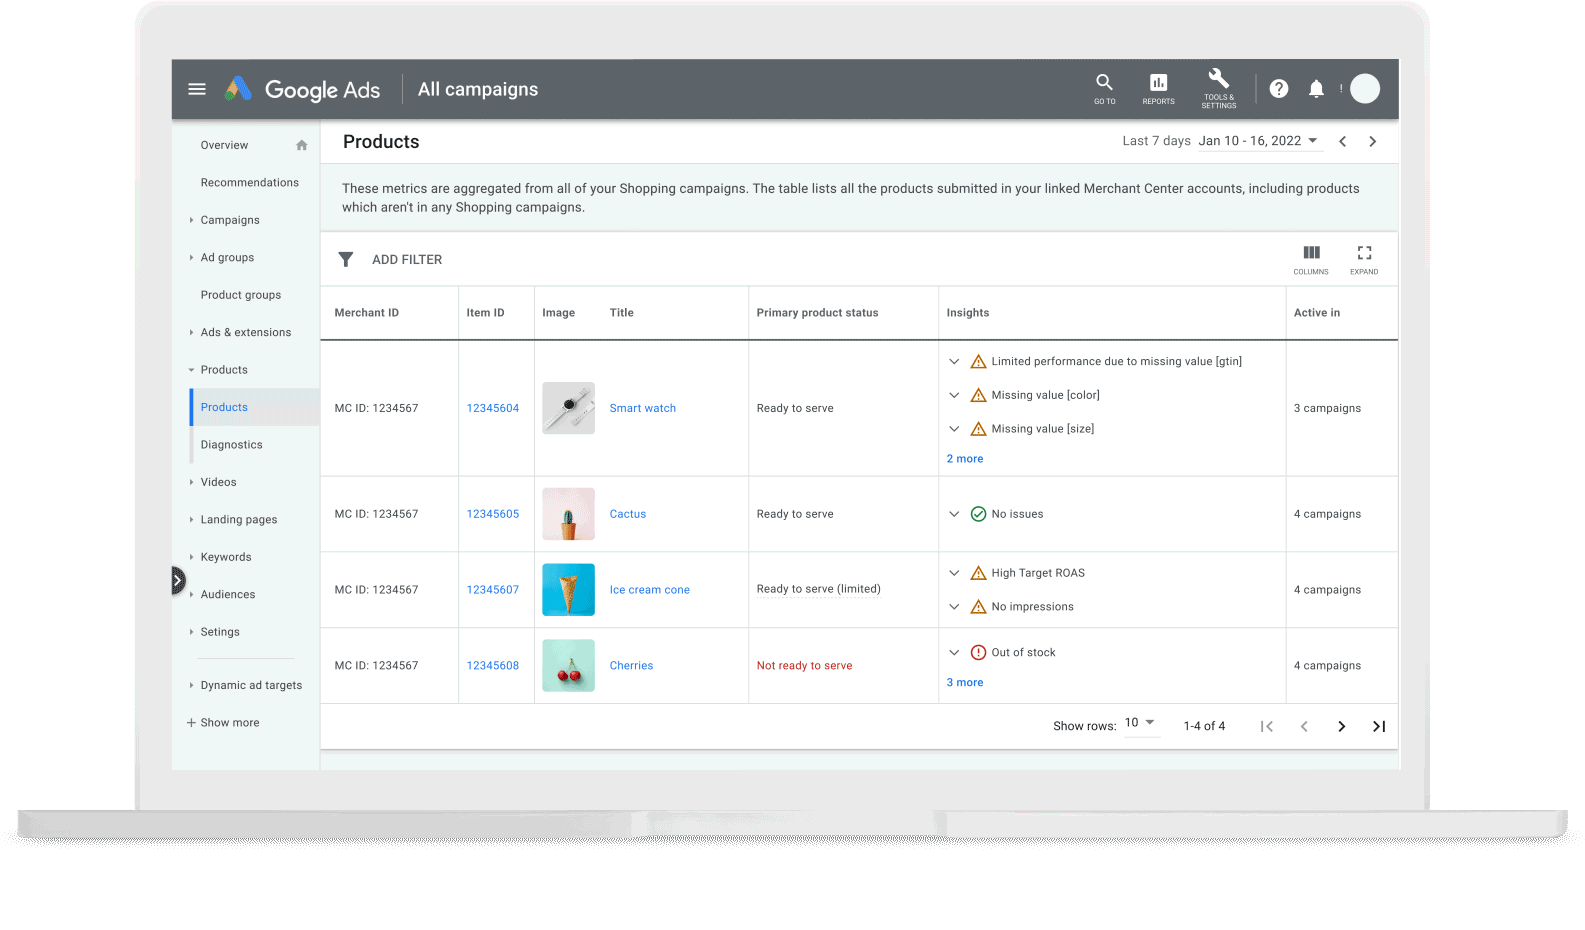 Desktop UI of product-specific insights on the Google Ads products tab